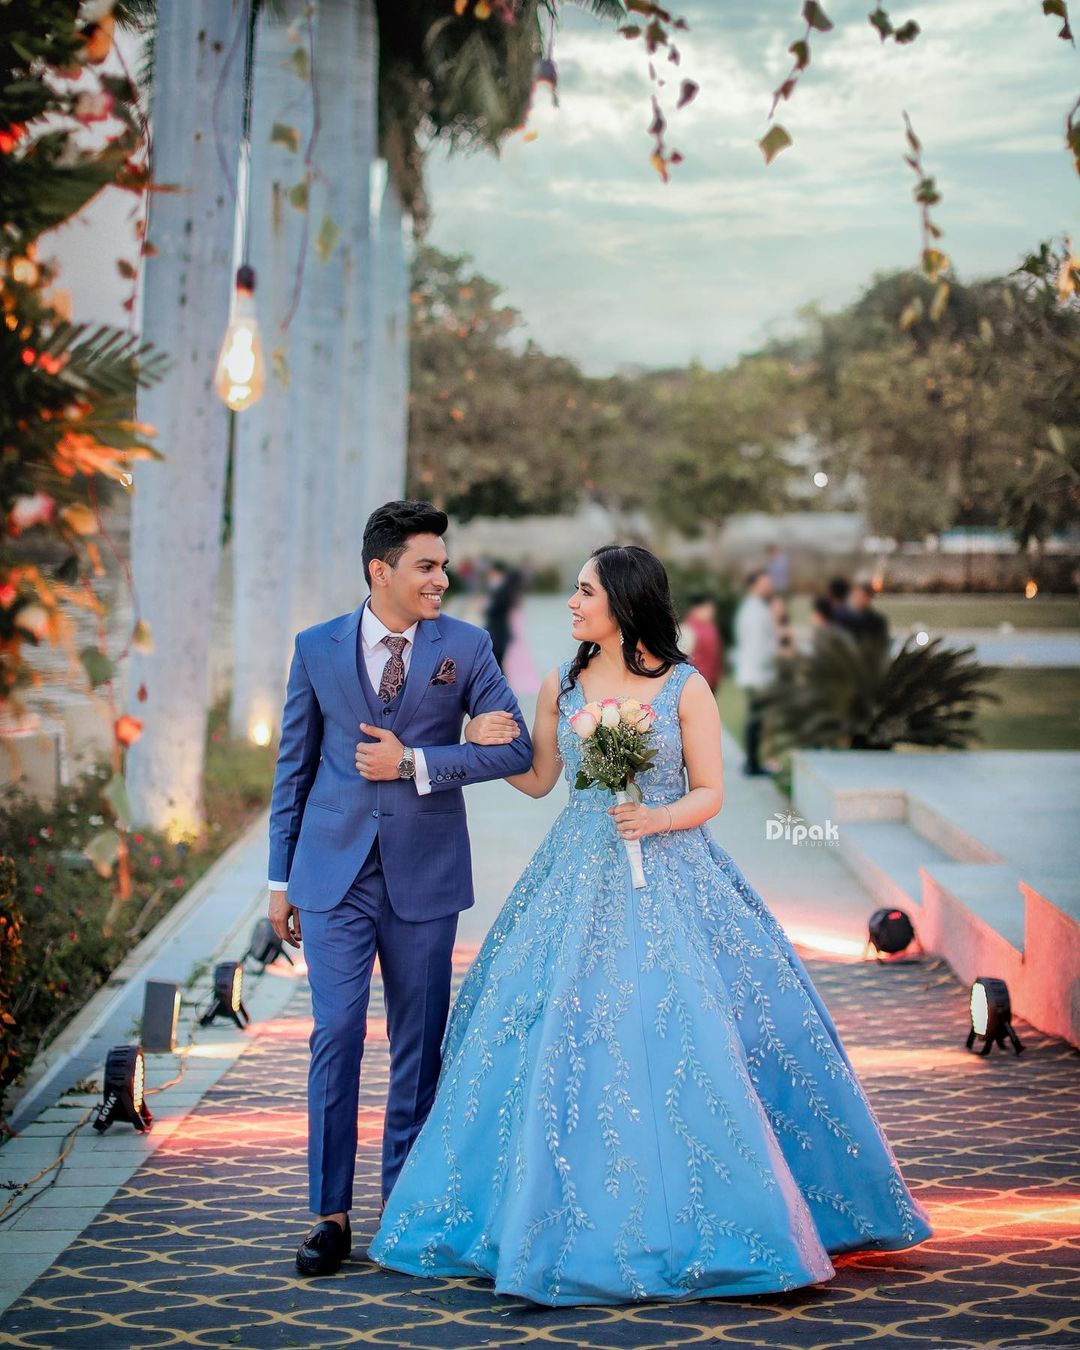 bride and groom in blue engagement dresses